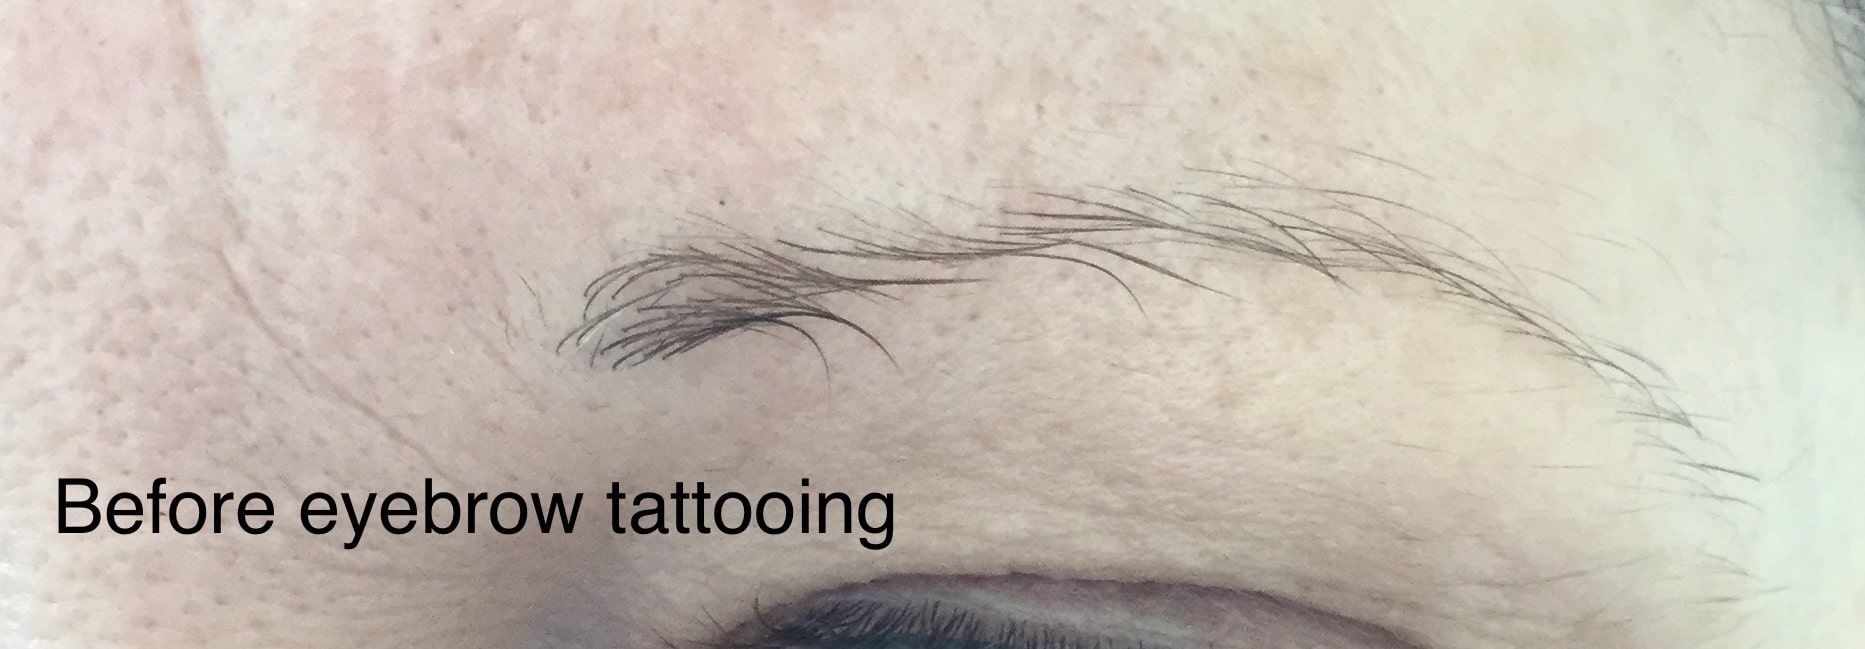 Before Eyebrow Tattooing Process — Cosmetic Tattooing in Bundaberg, QLD